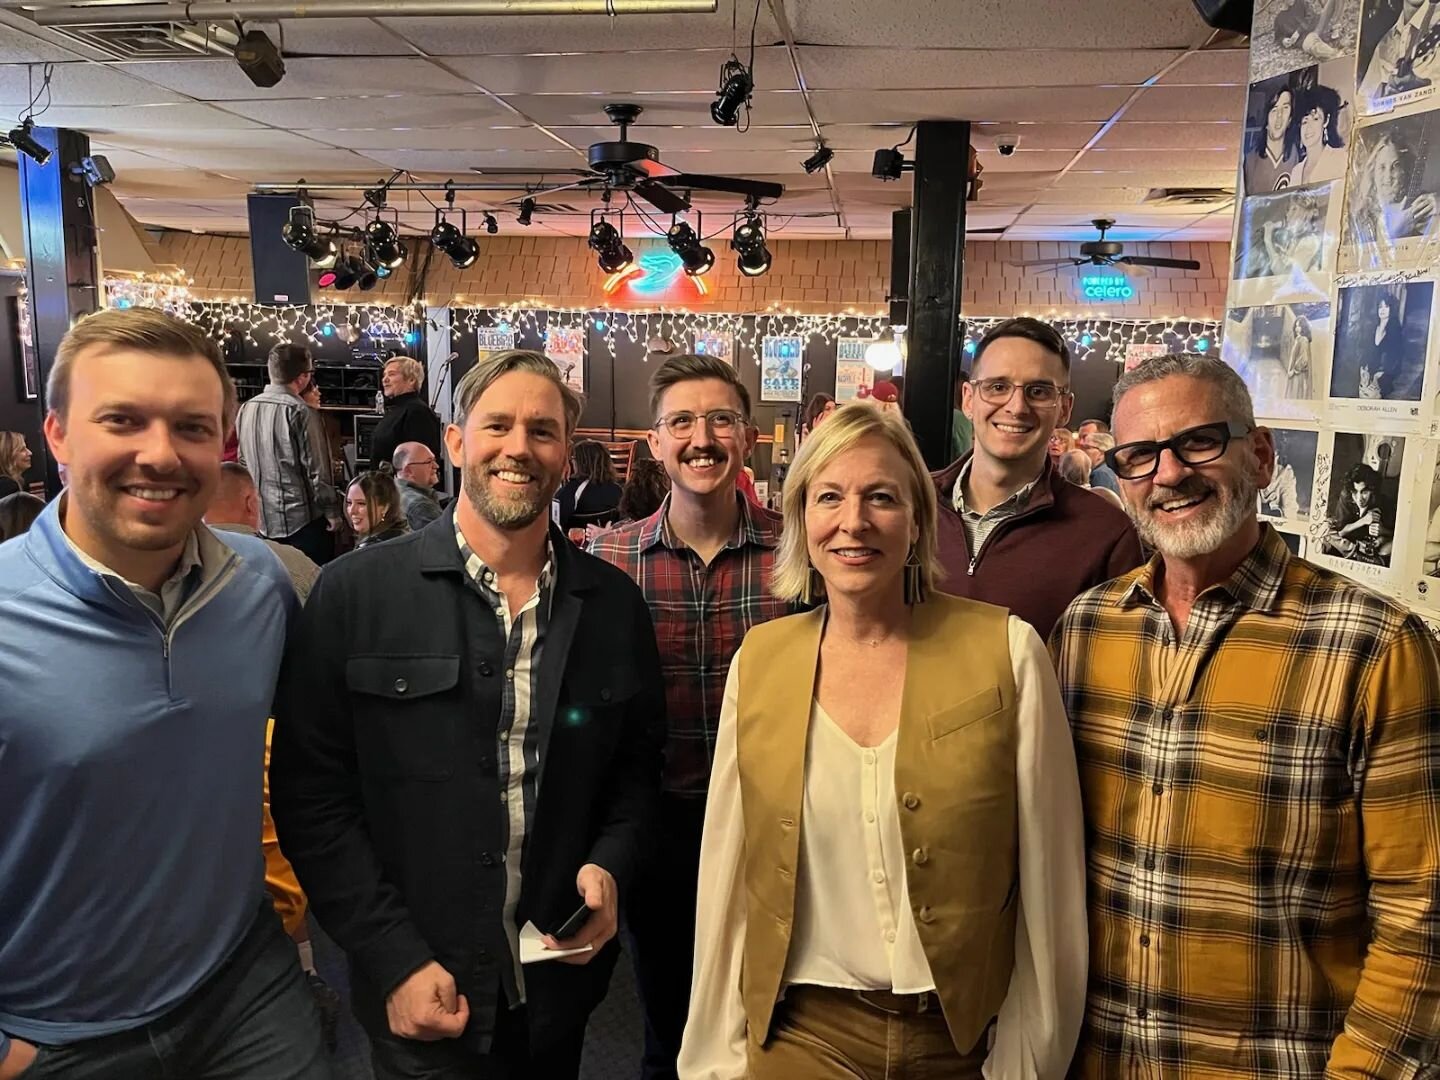 A fantastic time in Nashville connecting with our team, clients, and partners! Looking forward to more events and collaborations created in the heart of Music City! 🎶🤝